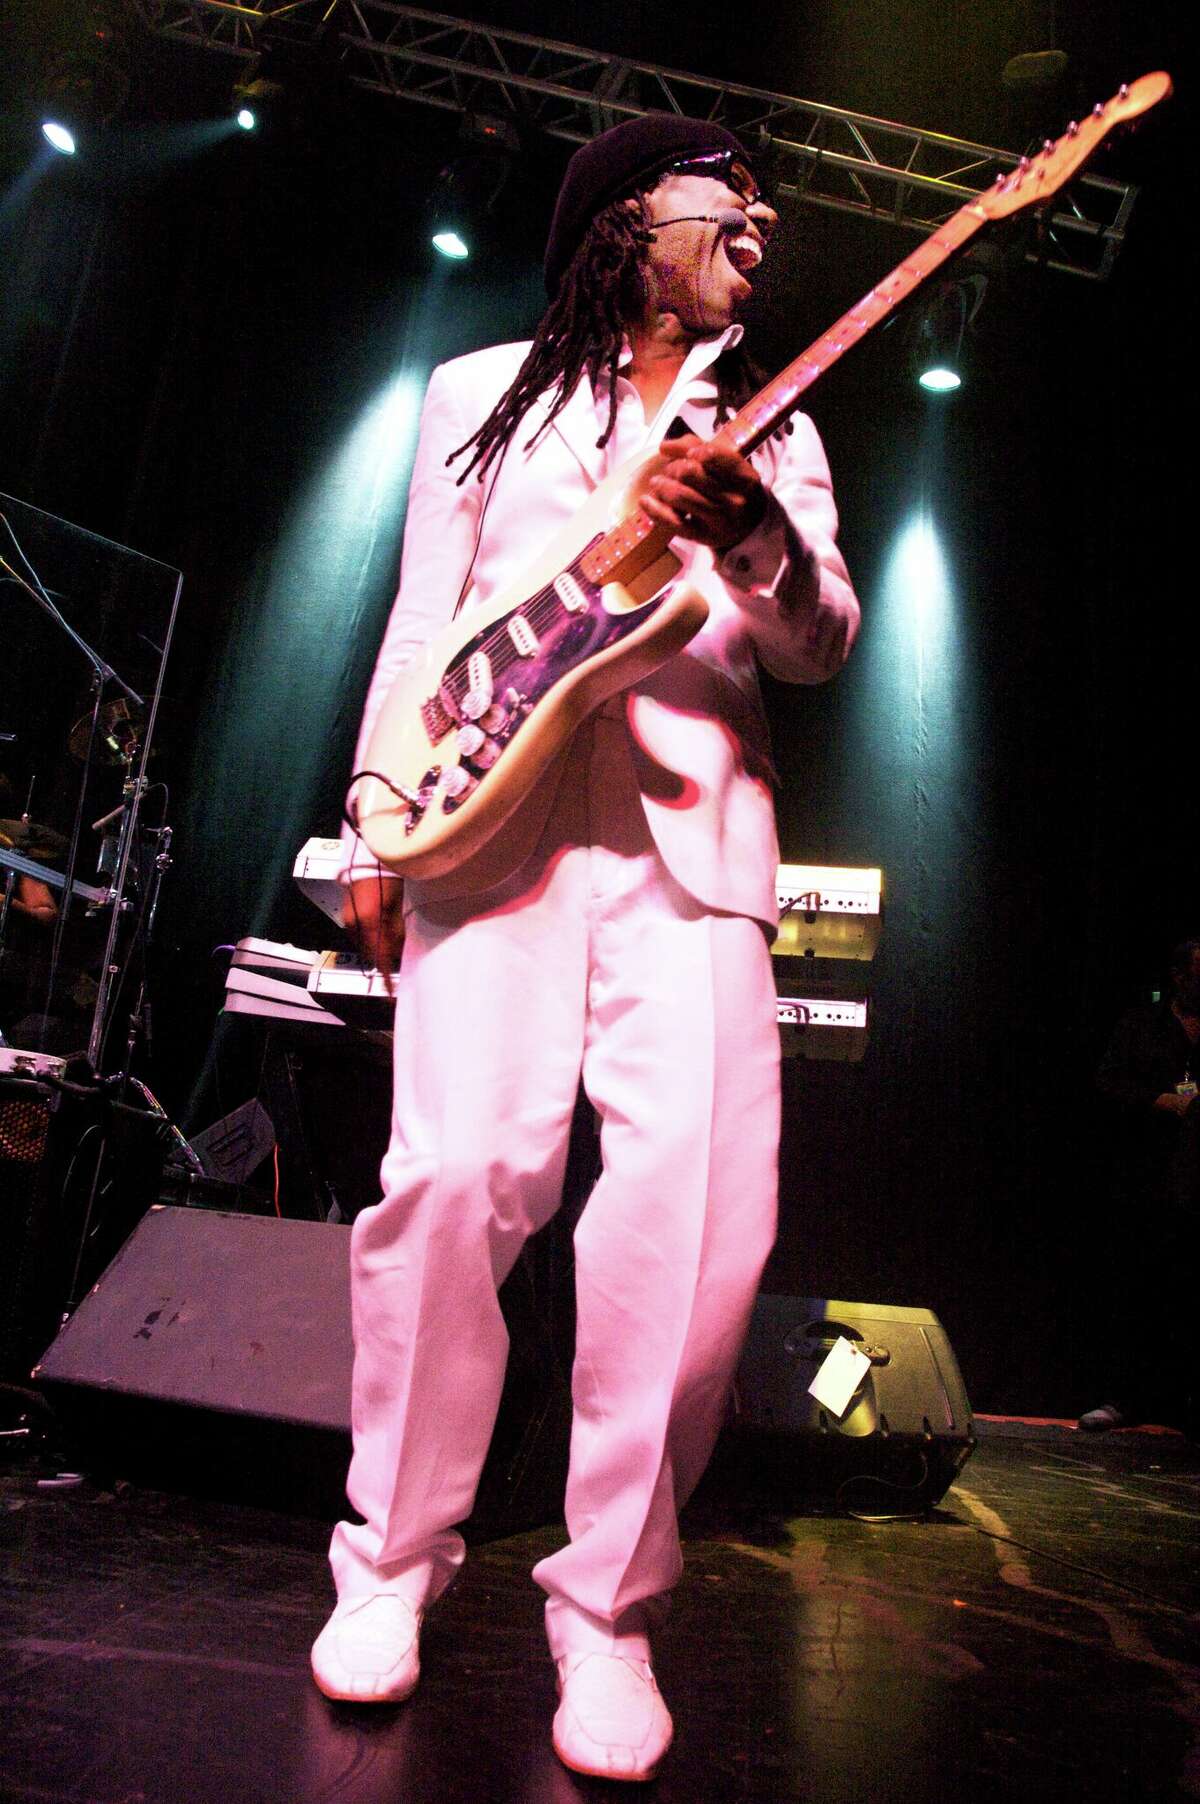 “CHIC featuring Nile Rodgers” headlines the Levitt Pavilion for the Performing Arts’ annual Summer Gala Concert on Thursday, Aug. 11, at the Levitt Pavilion, located at 40 Jesup Road in Westport.